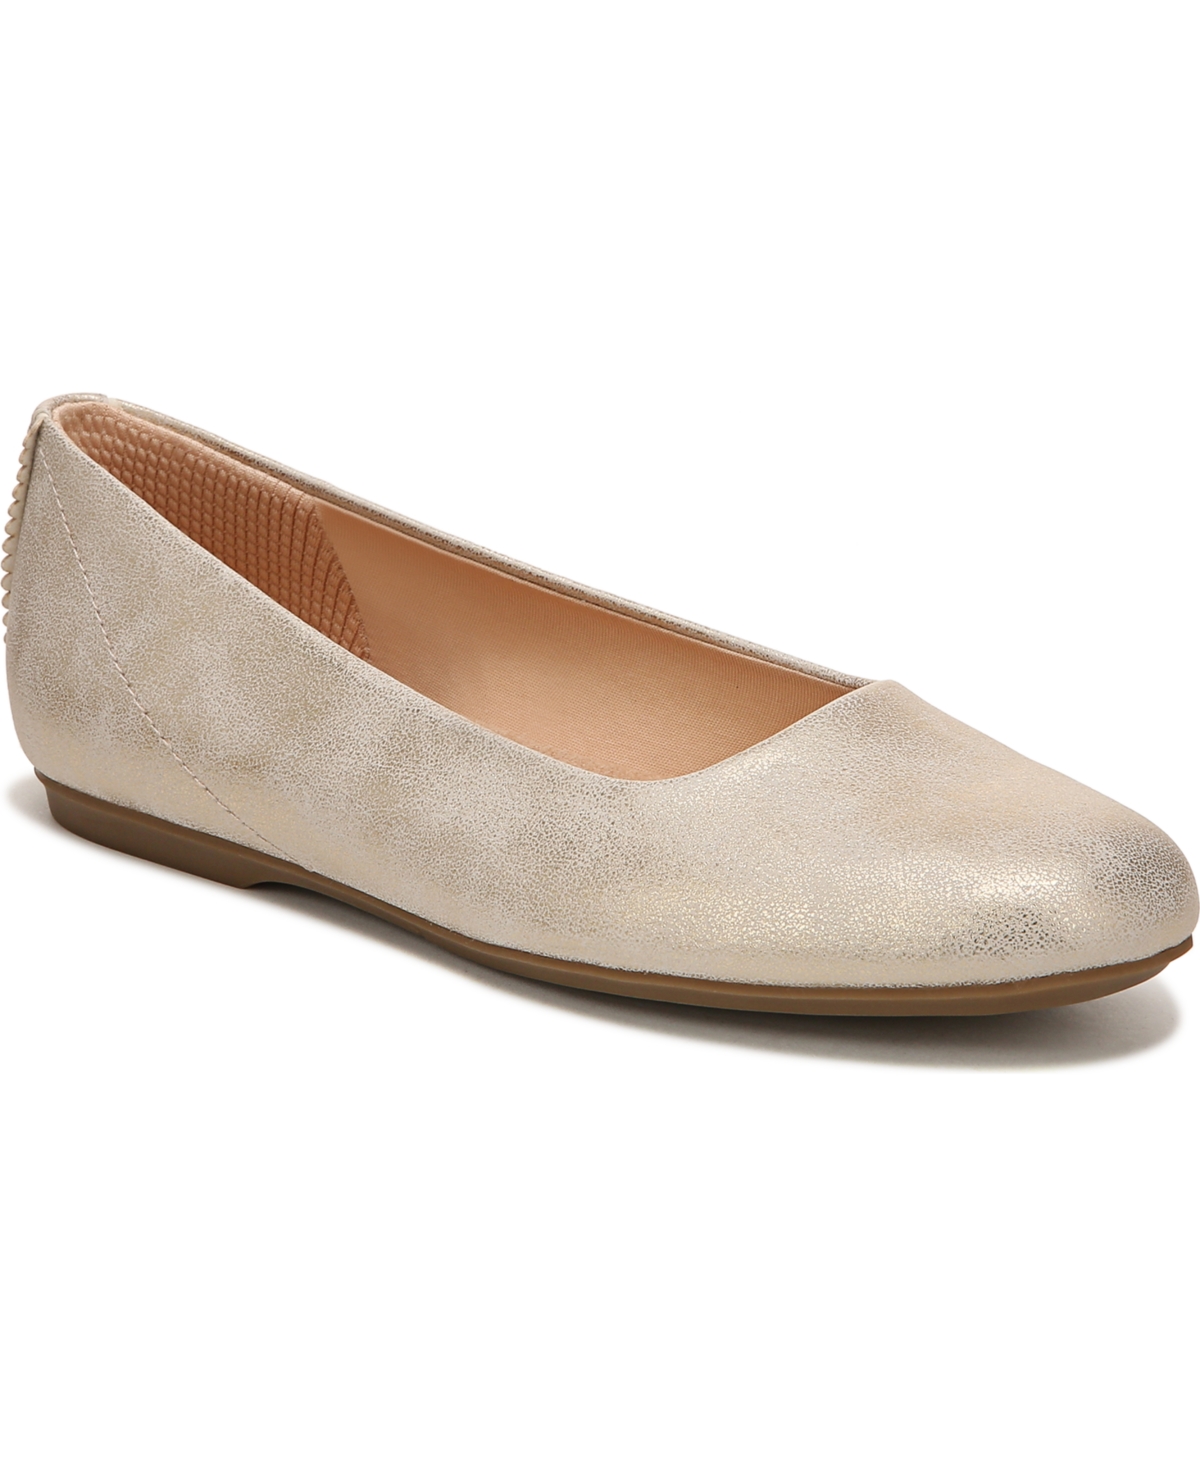 Dr. Scholl's Women's Wexley Flats Women's Shoes In Light Gold Faux Leather